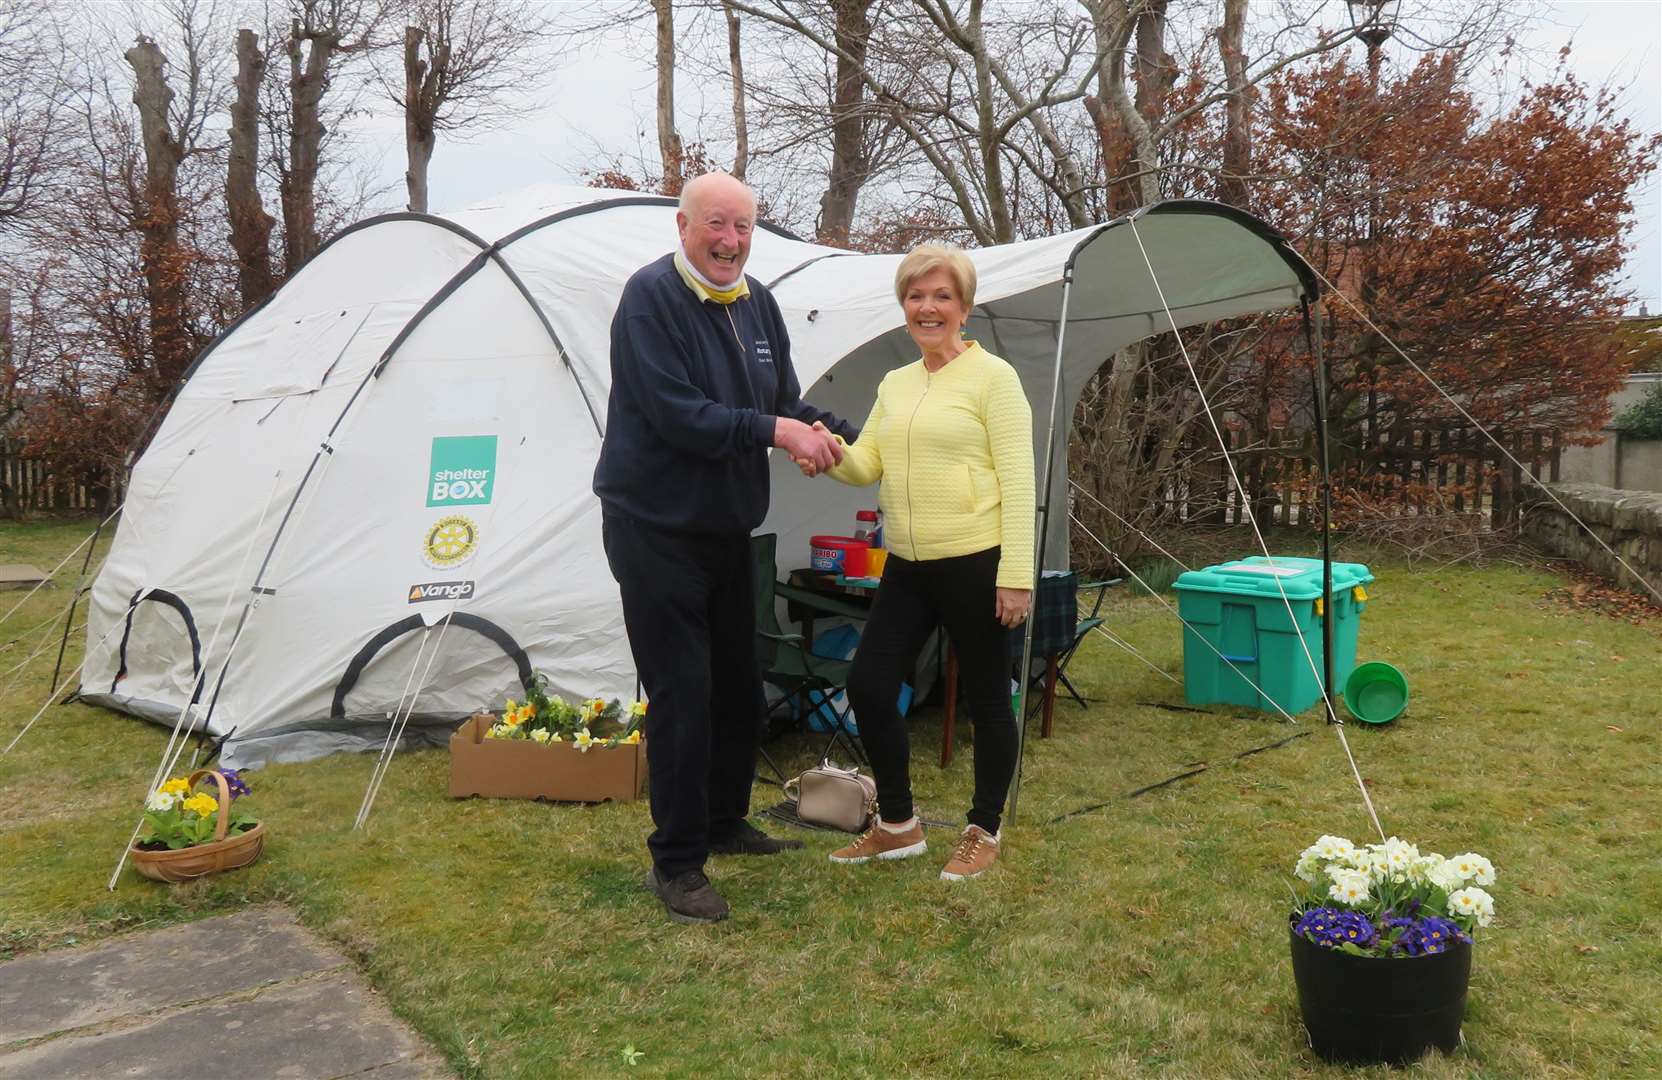 Cllr Deirdre Mackay visits Alistair Risk, who is highlighting the plight of Ukrainian refugees by moving into a tent for five days.